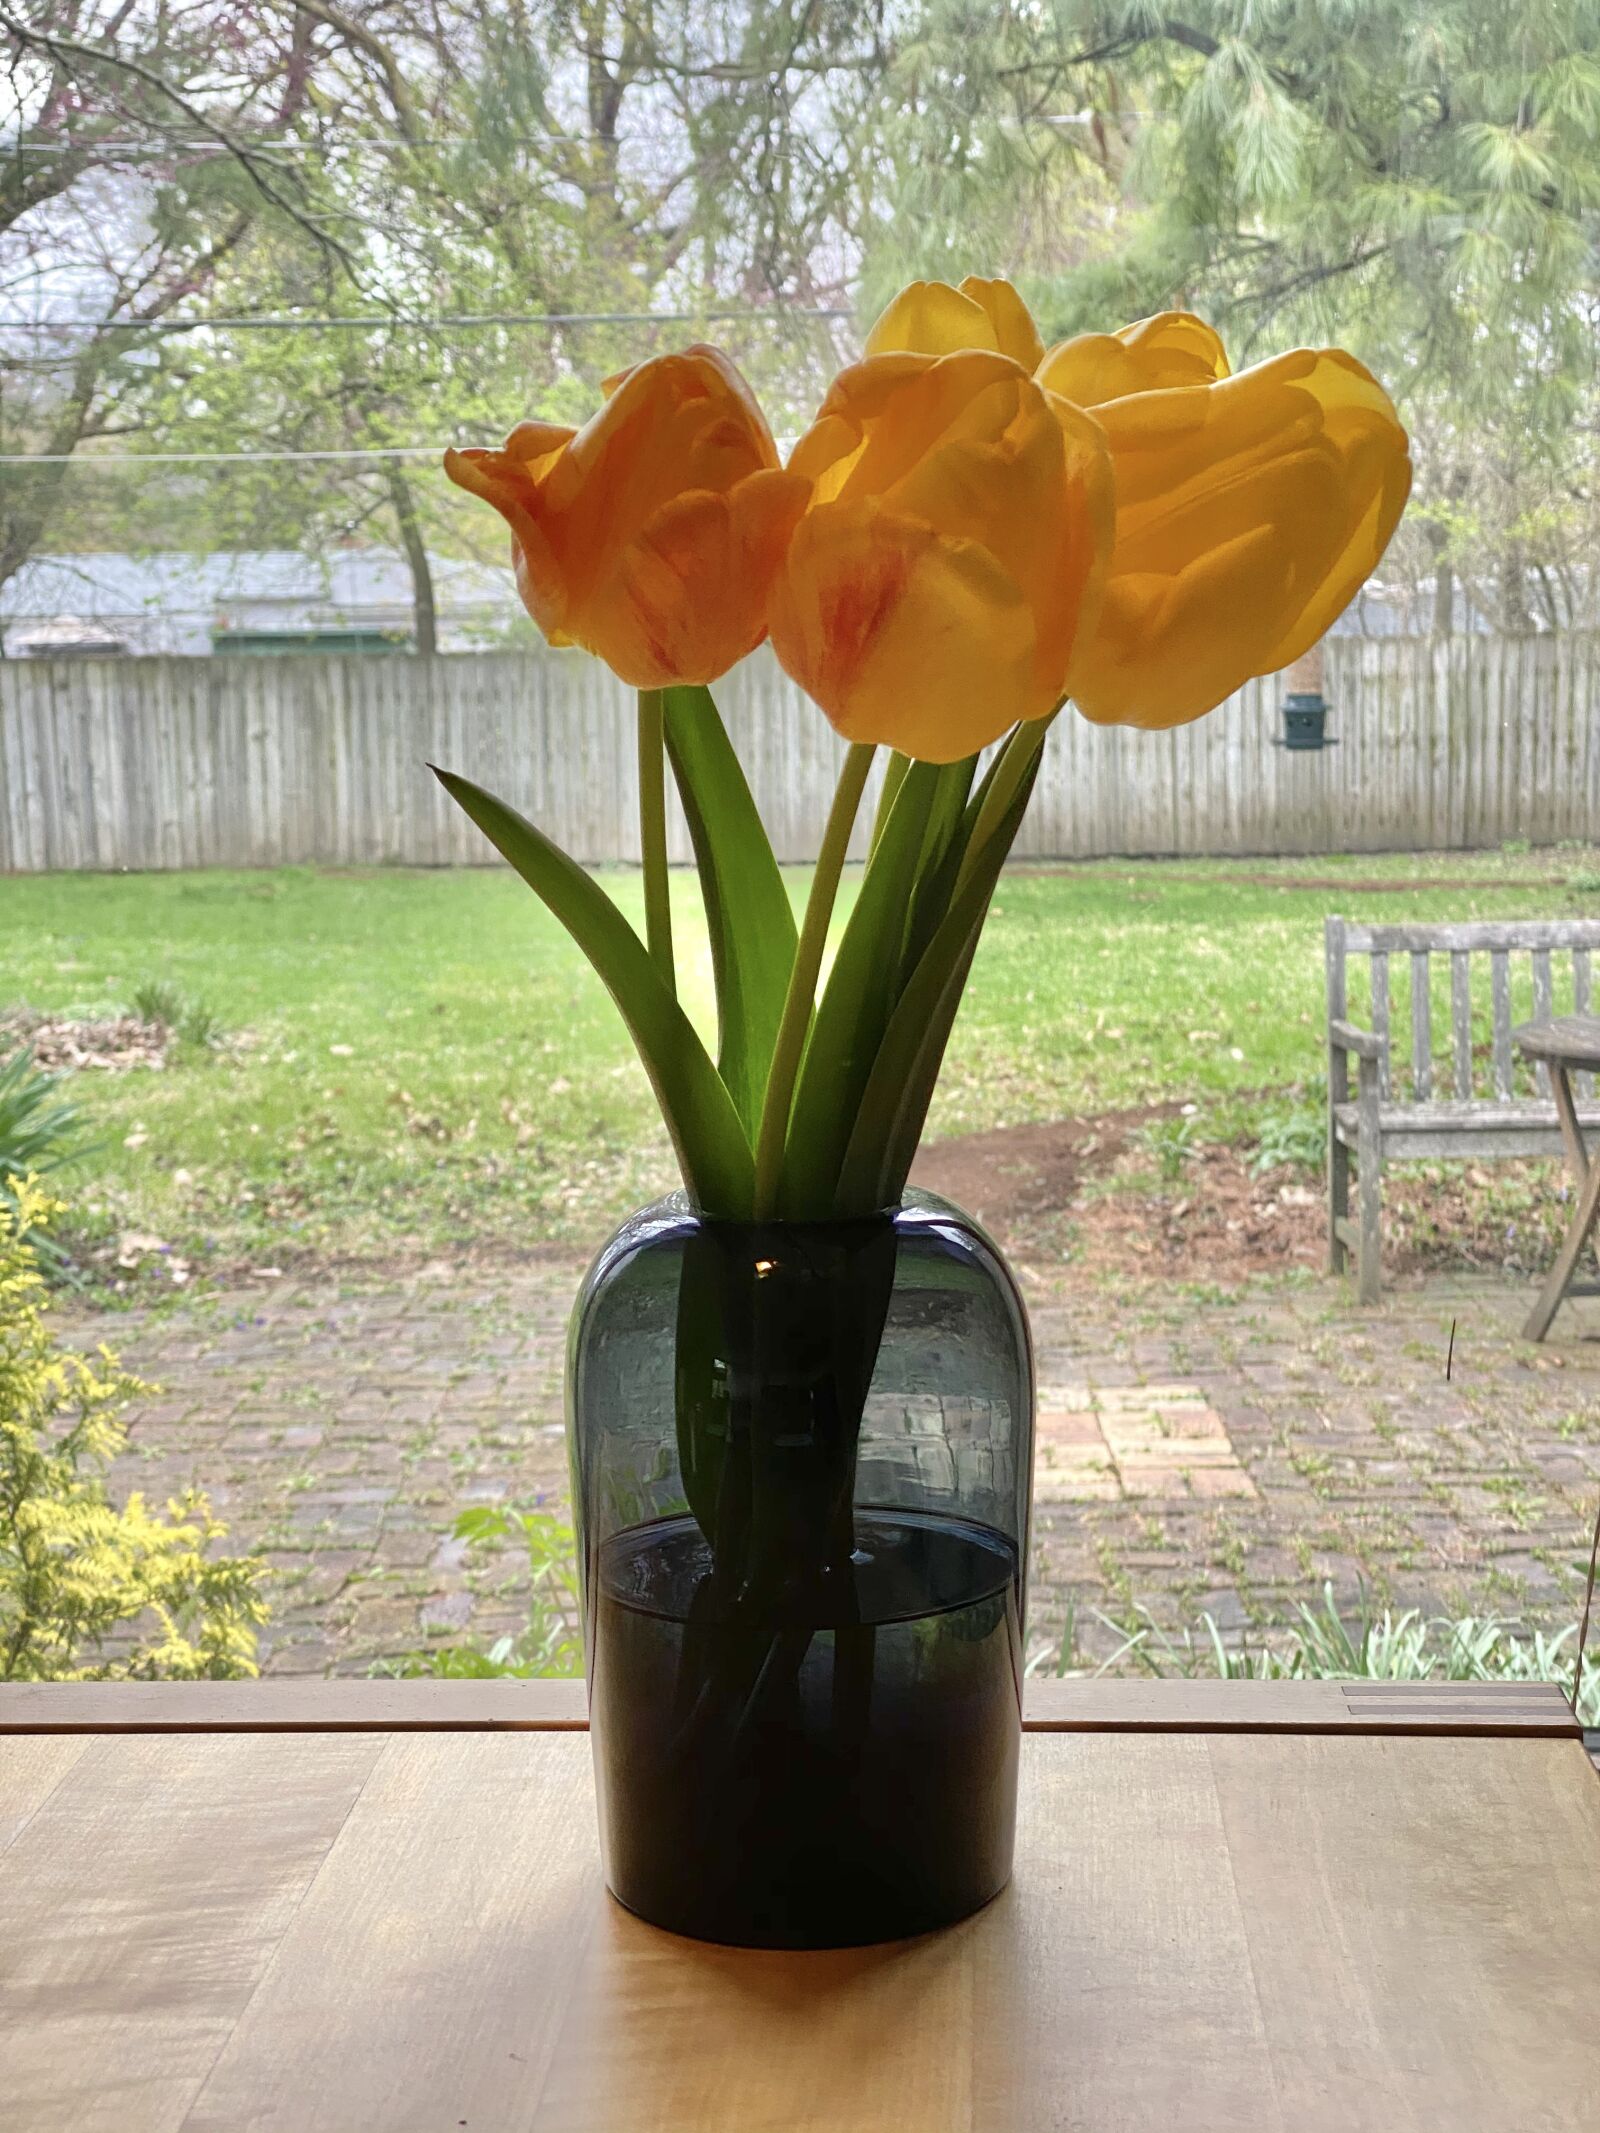 iPhone 11 Pro back triple camera 6mm f/2 sample photo. Tulips, flowers, alone photography